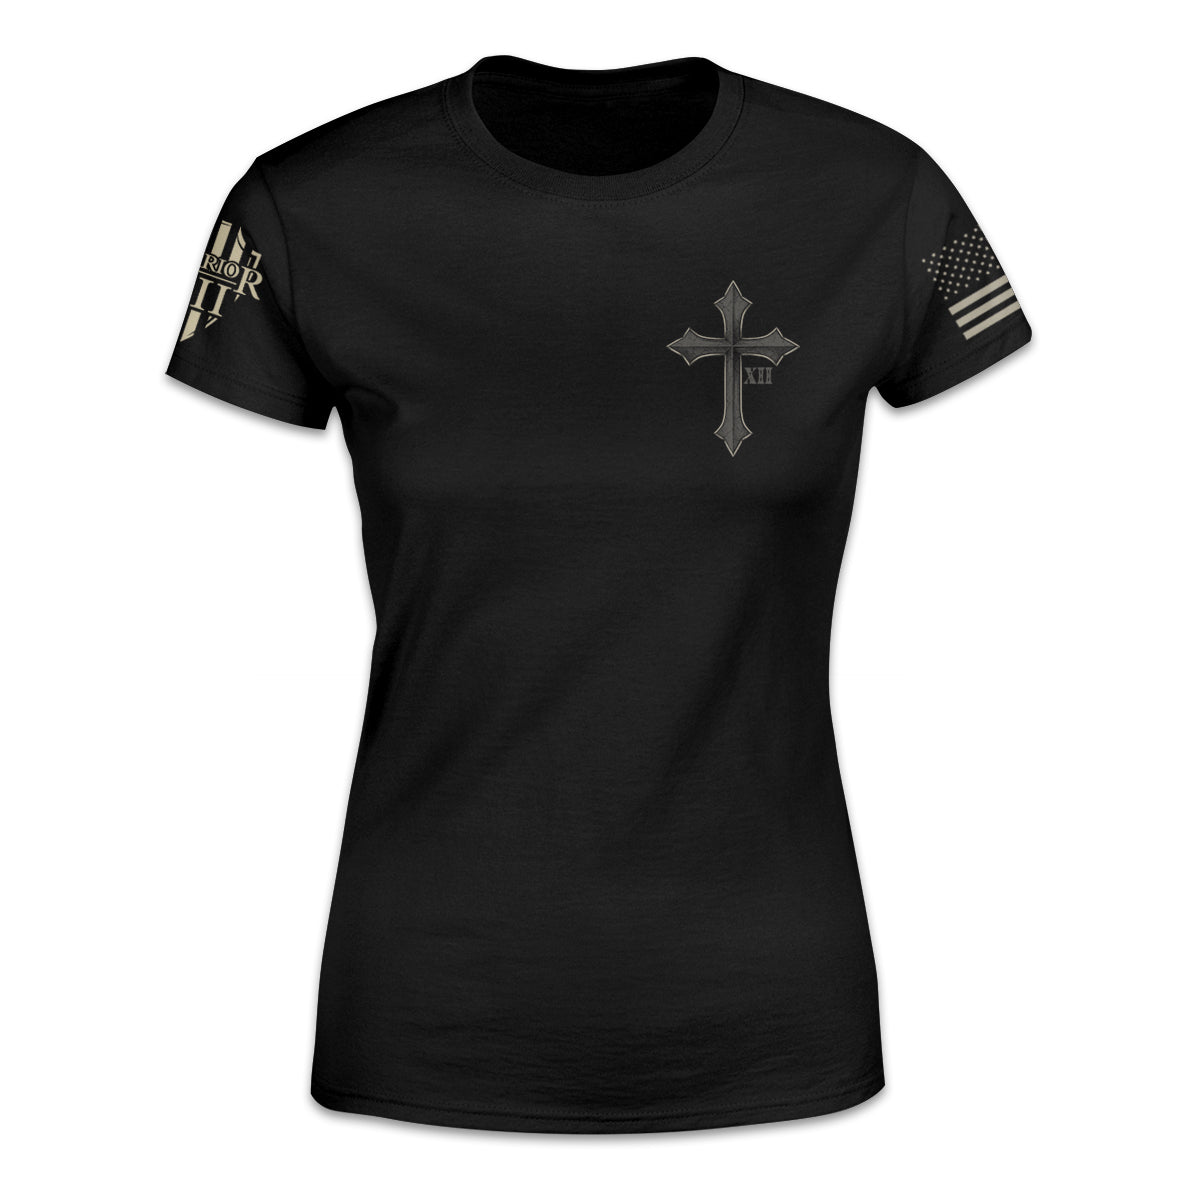 A black women's relaxed fit'shirt with the cross printed on the front.